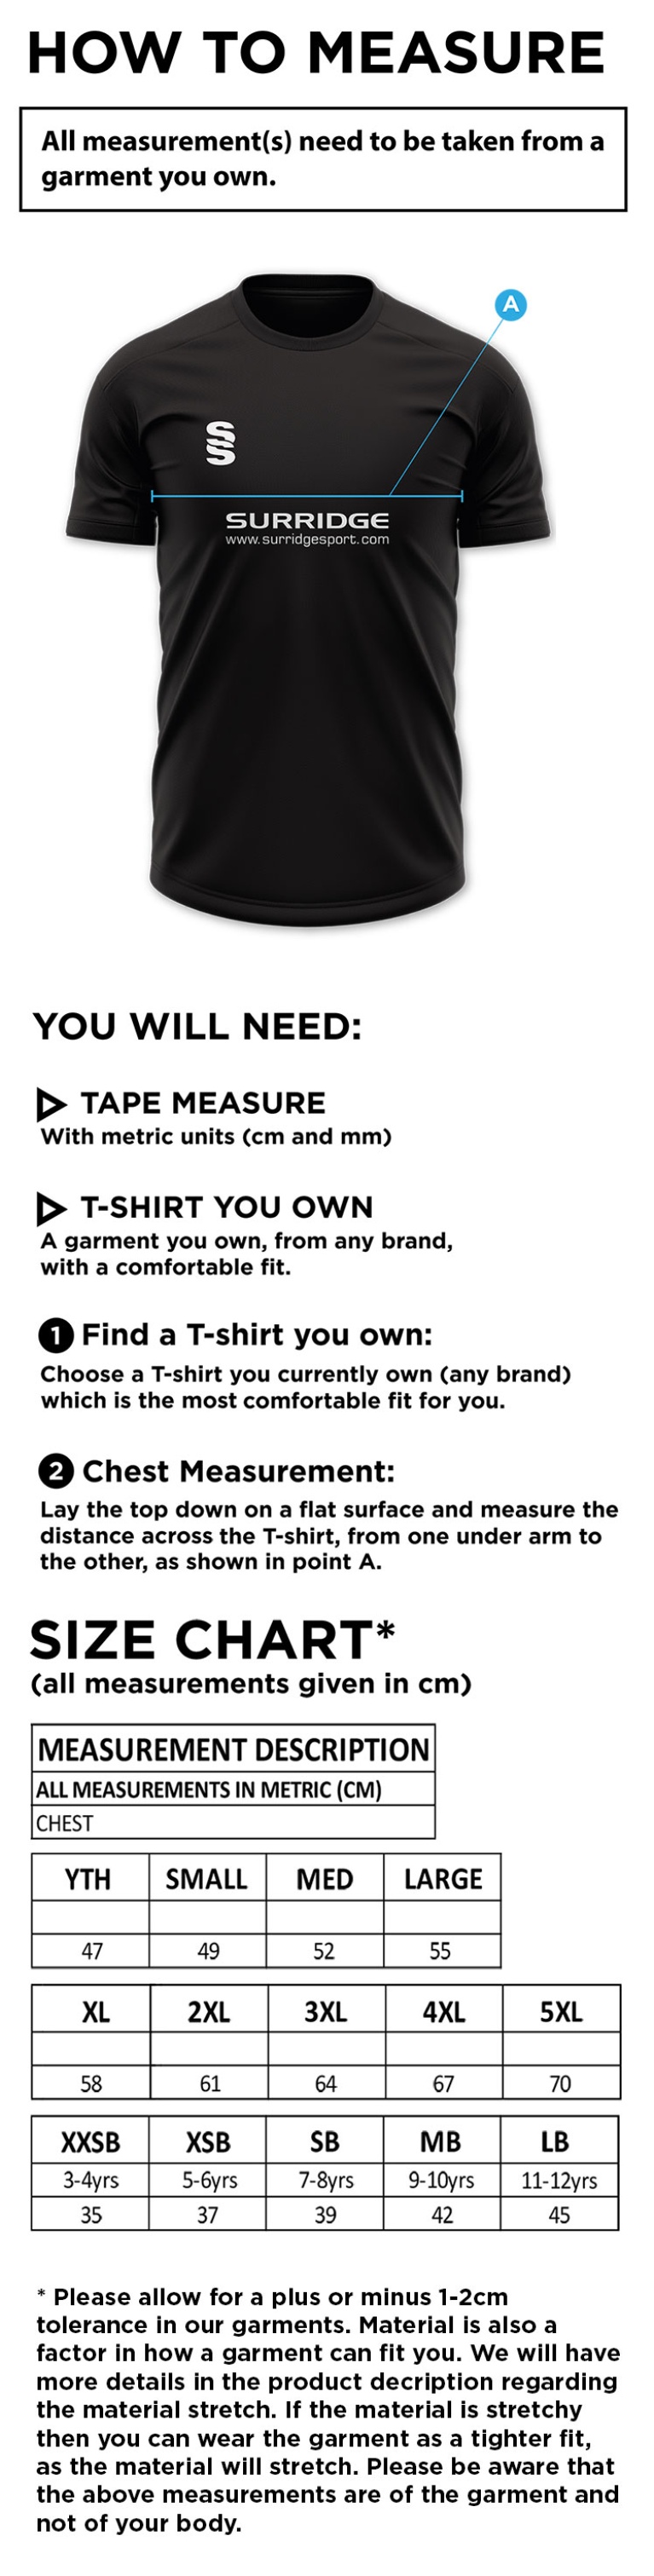 Youth's Dual Gym T-shirt : Grey Melange - Size Guide